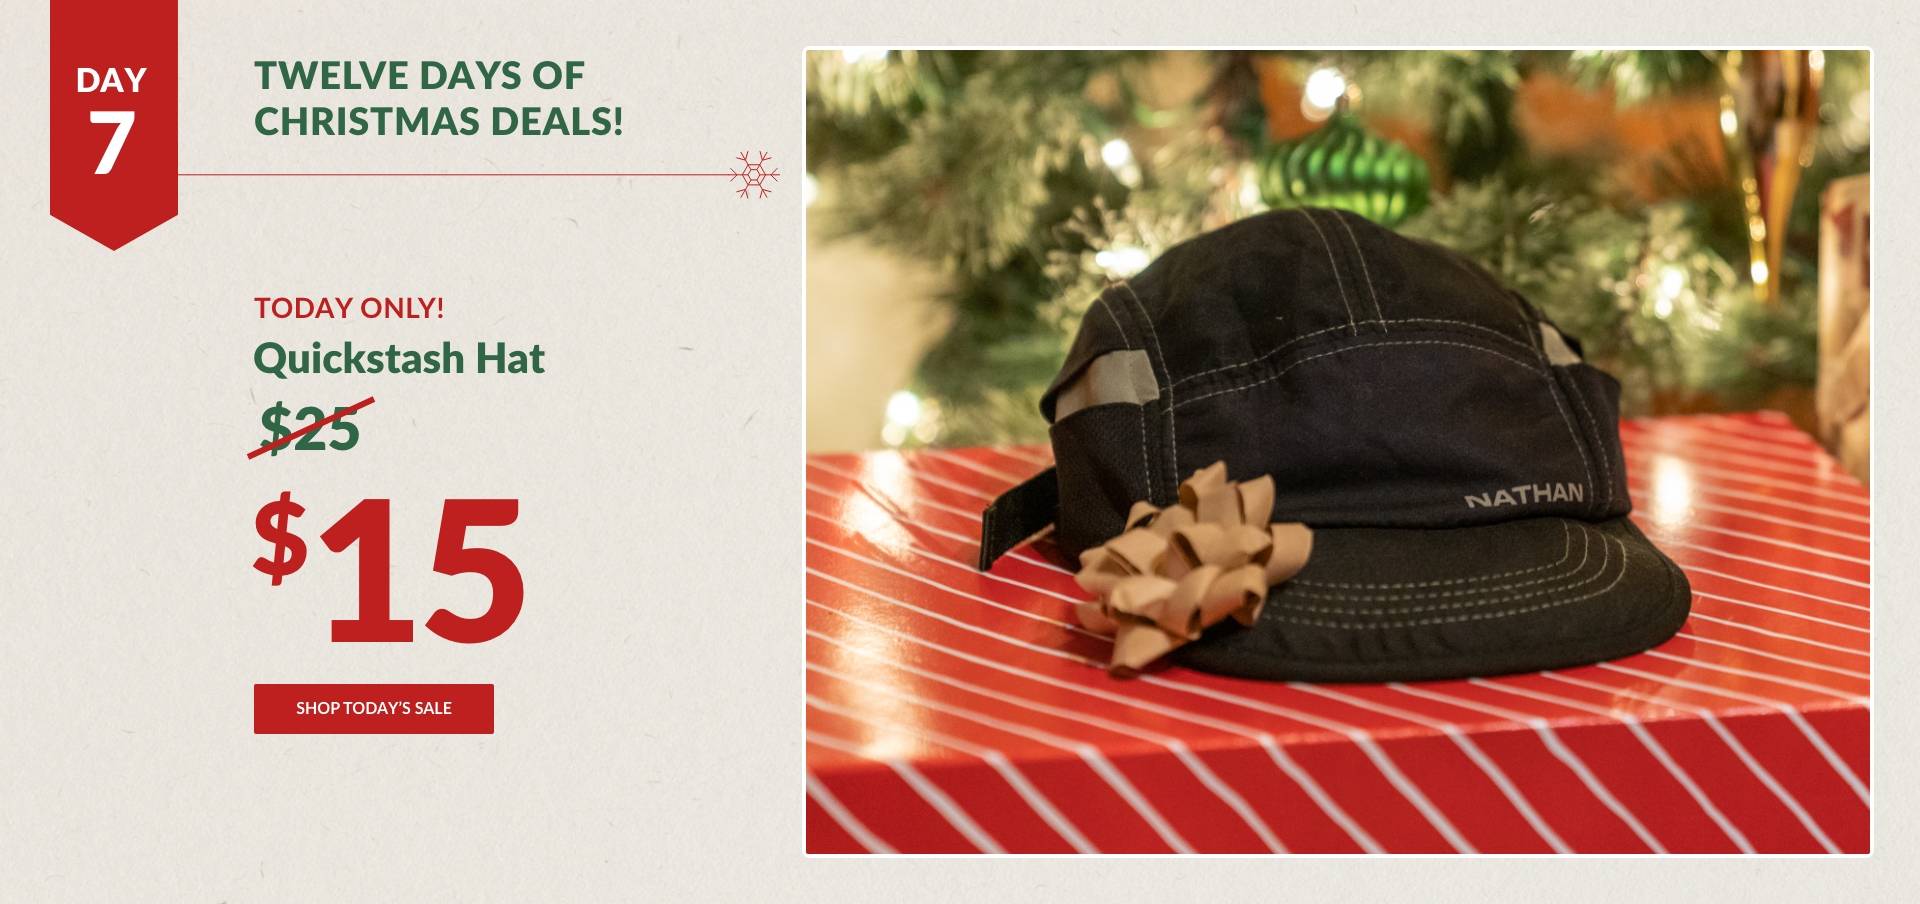 Today Only! $15 Quickstash Hat - Shop Today's Sale